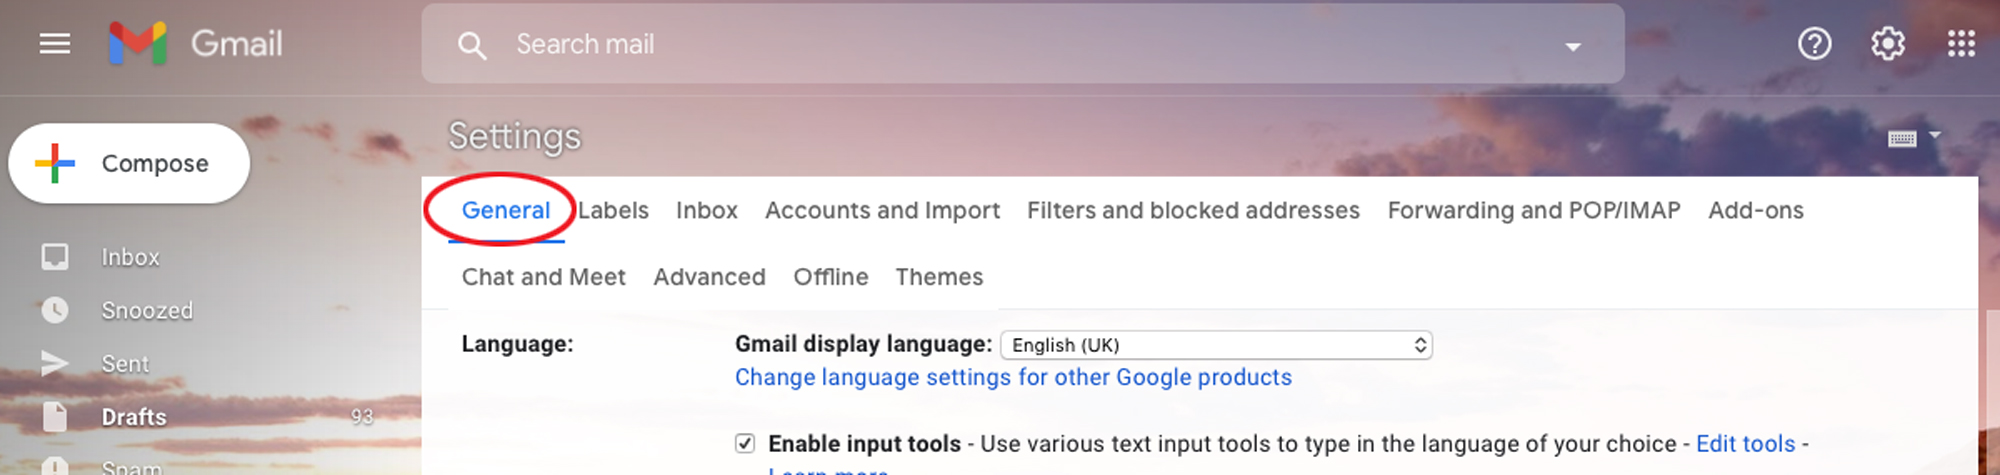 Accounts and Import gmail